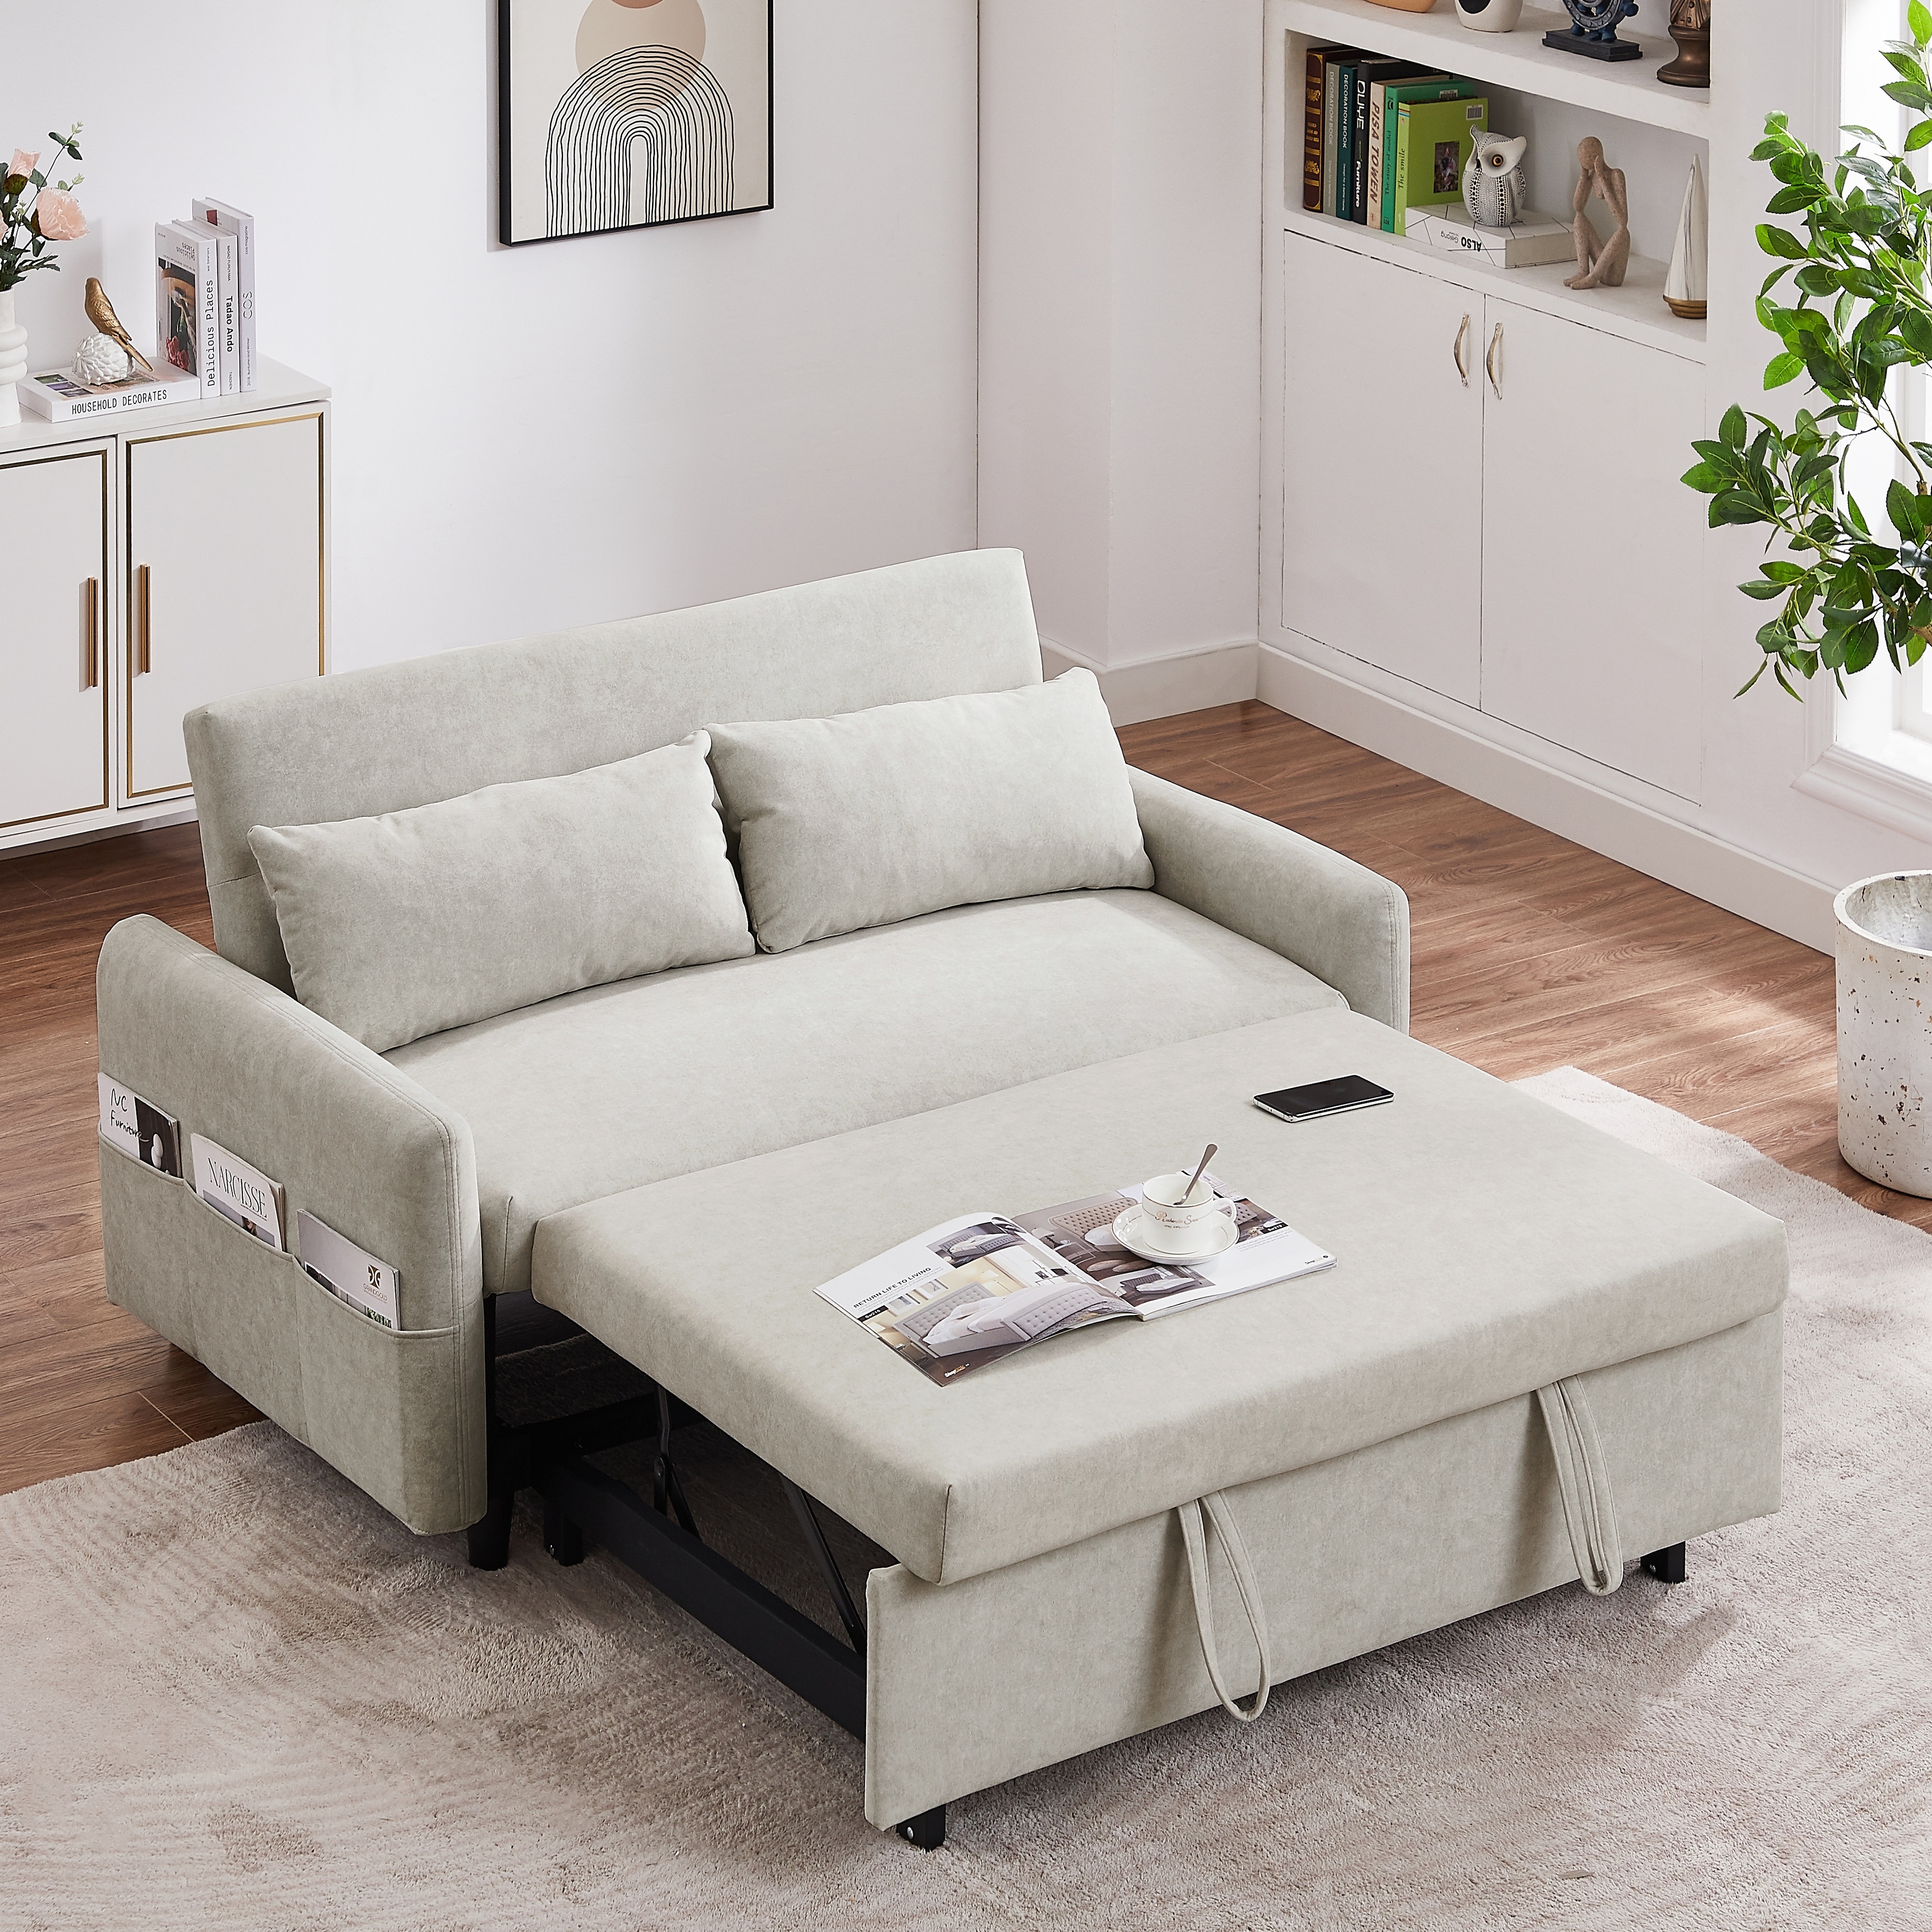  ESRADA Sofa with Two Pillow Adjustable Backrest Leisure Padded  Floor Sofa with Back Support for Living Room Bedroom Balcony Khaki-160 *  115cm : Home & Kitchen